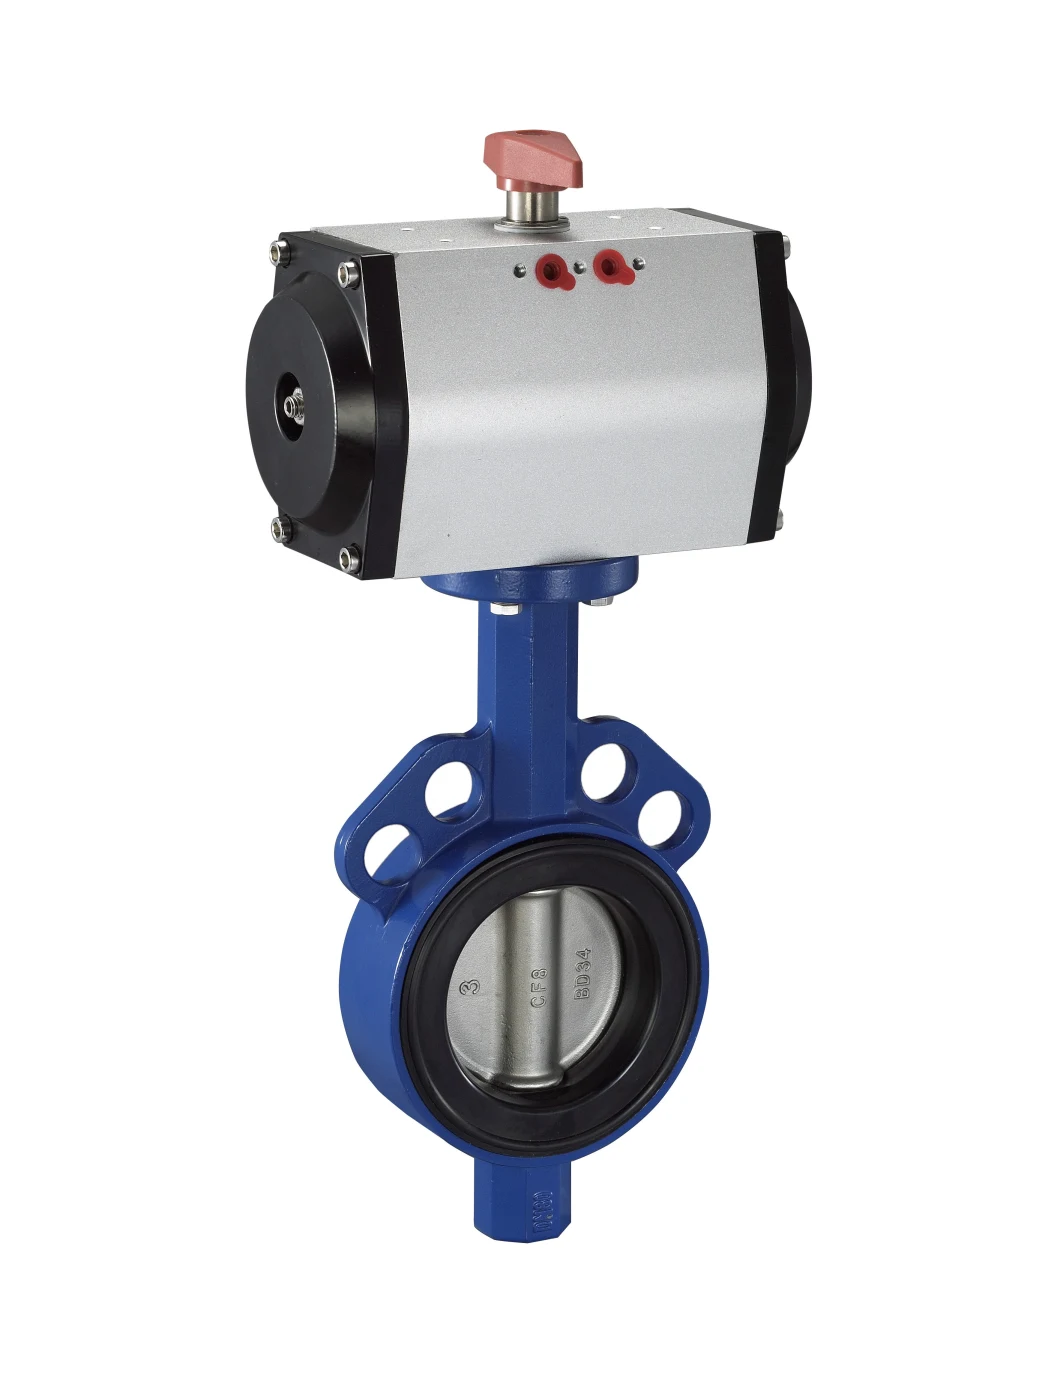 High Performance Single Acting Pneumatic Valve Actuator for Valve Automation